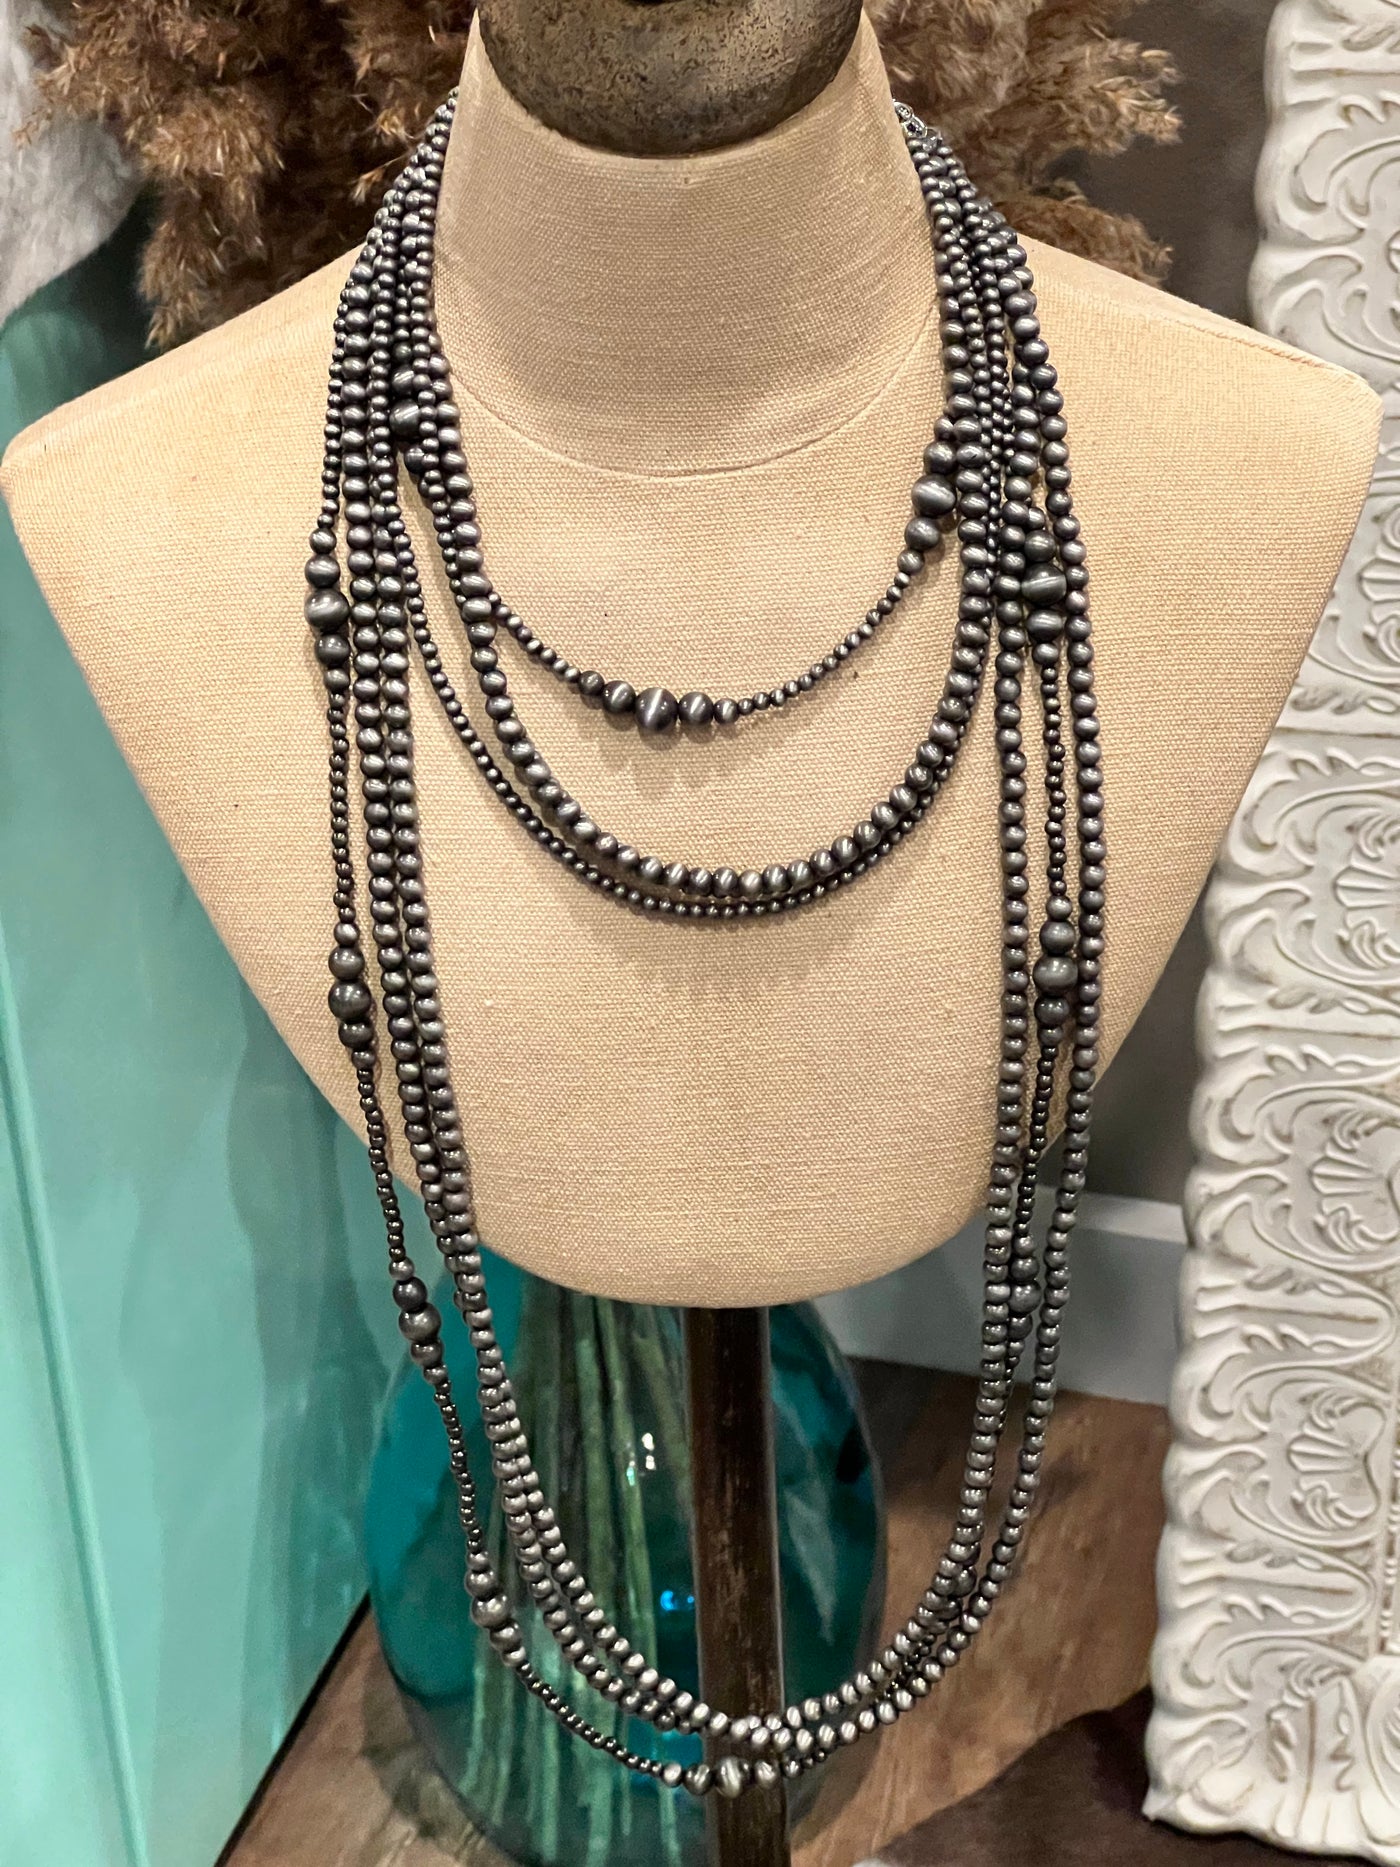 The Chimayo Triple Strand Necklace